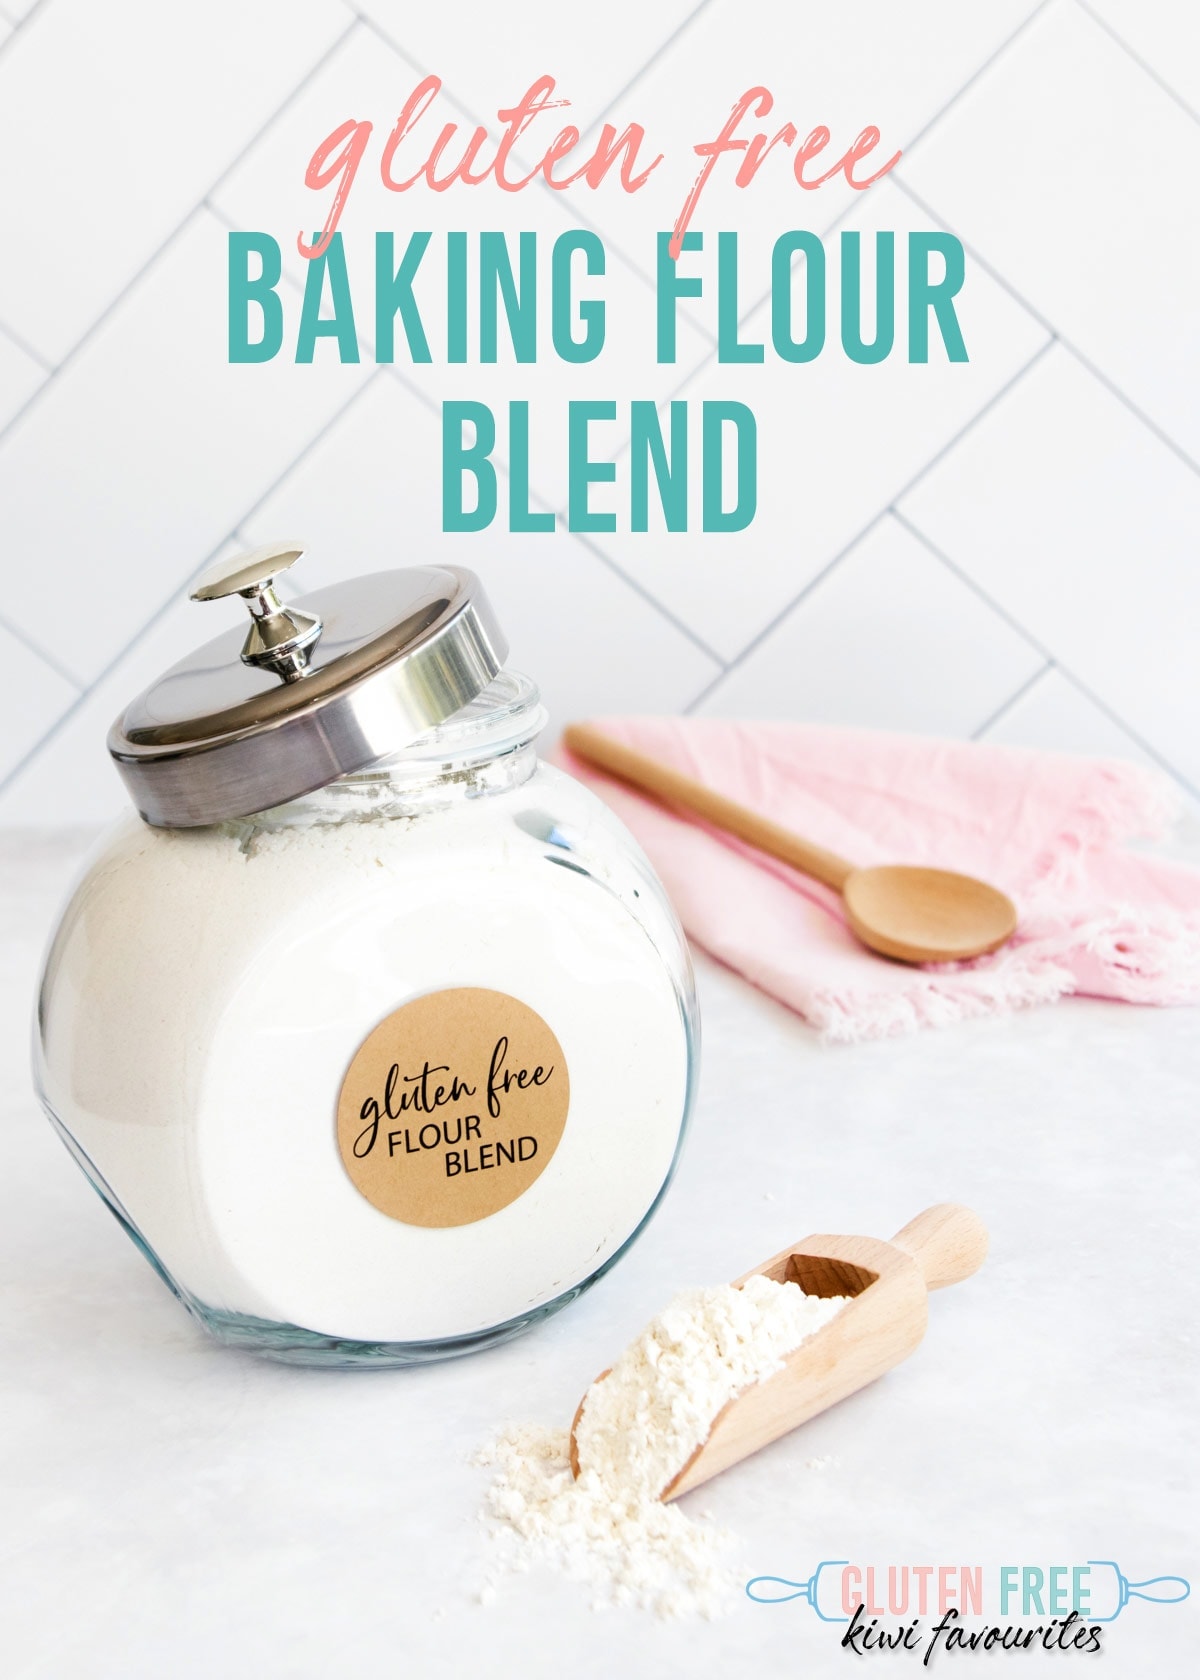 A large jar of flour on a grey background, with a small wooden scoop of flour in front. Text overlay reads: "gluten free baking flour blend".